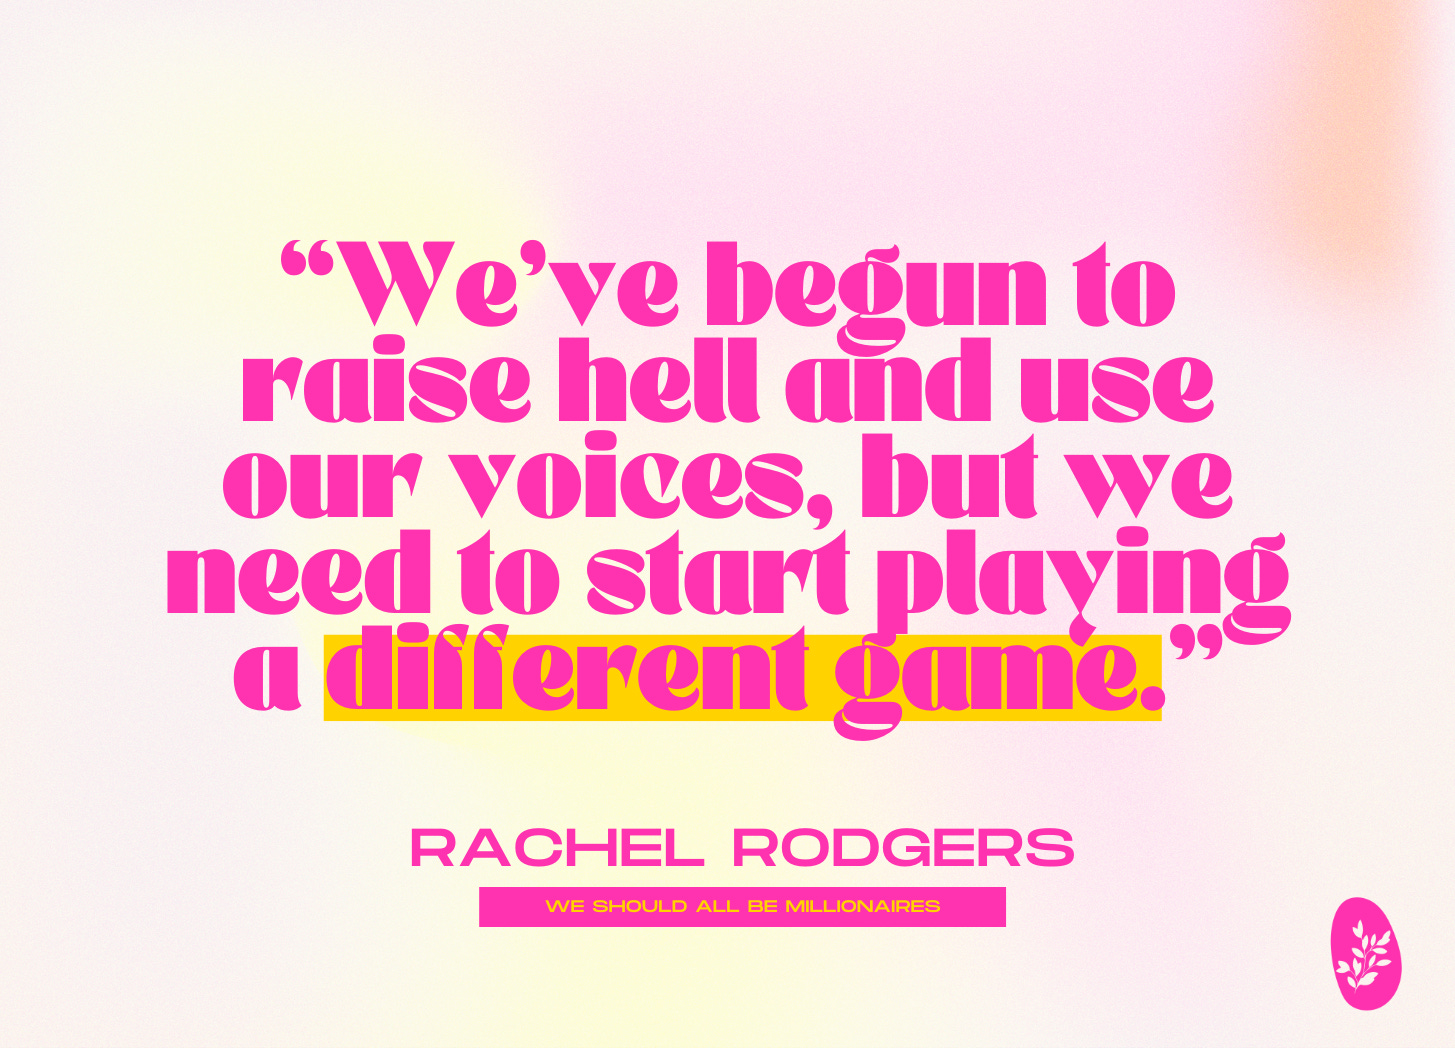 We’ve begun to raise hell and use our voices, but we need to start playing a different game. —Rachel Rodgers, We Should All Be Millionaires